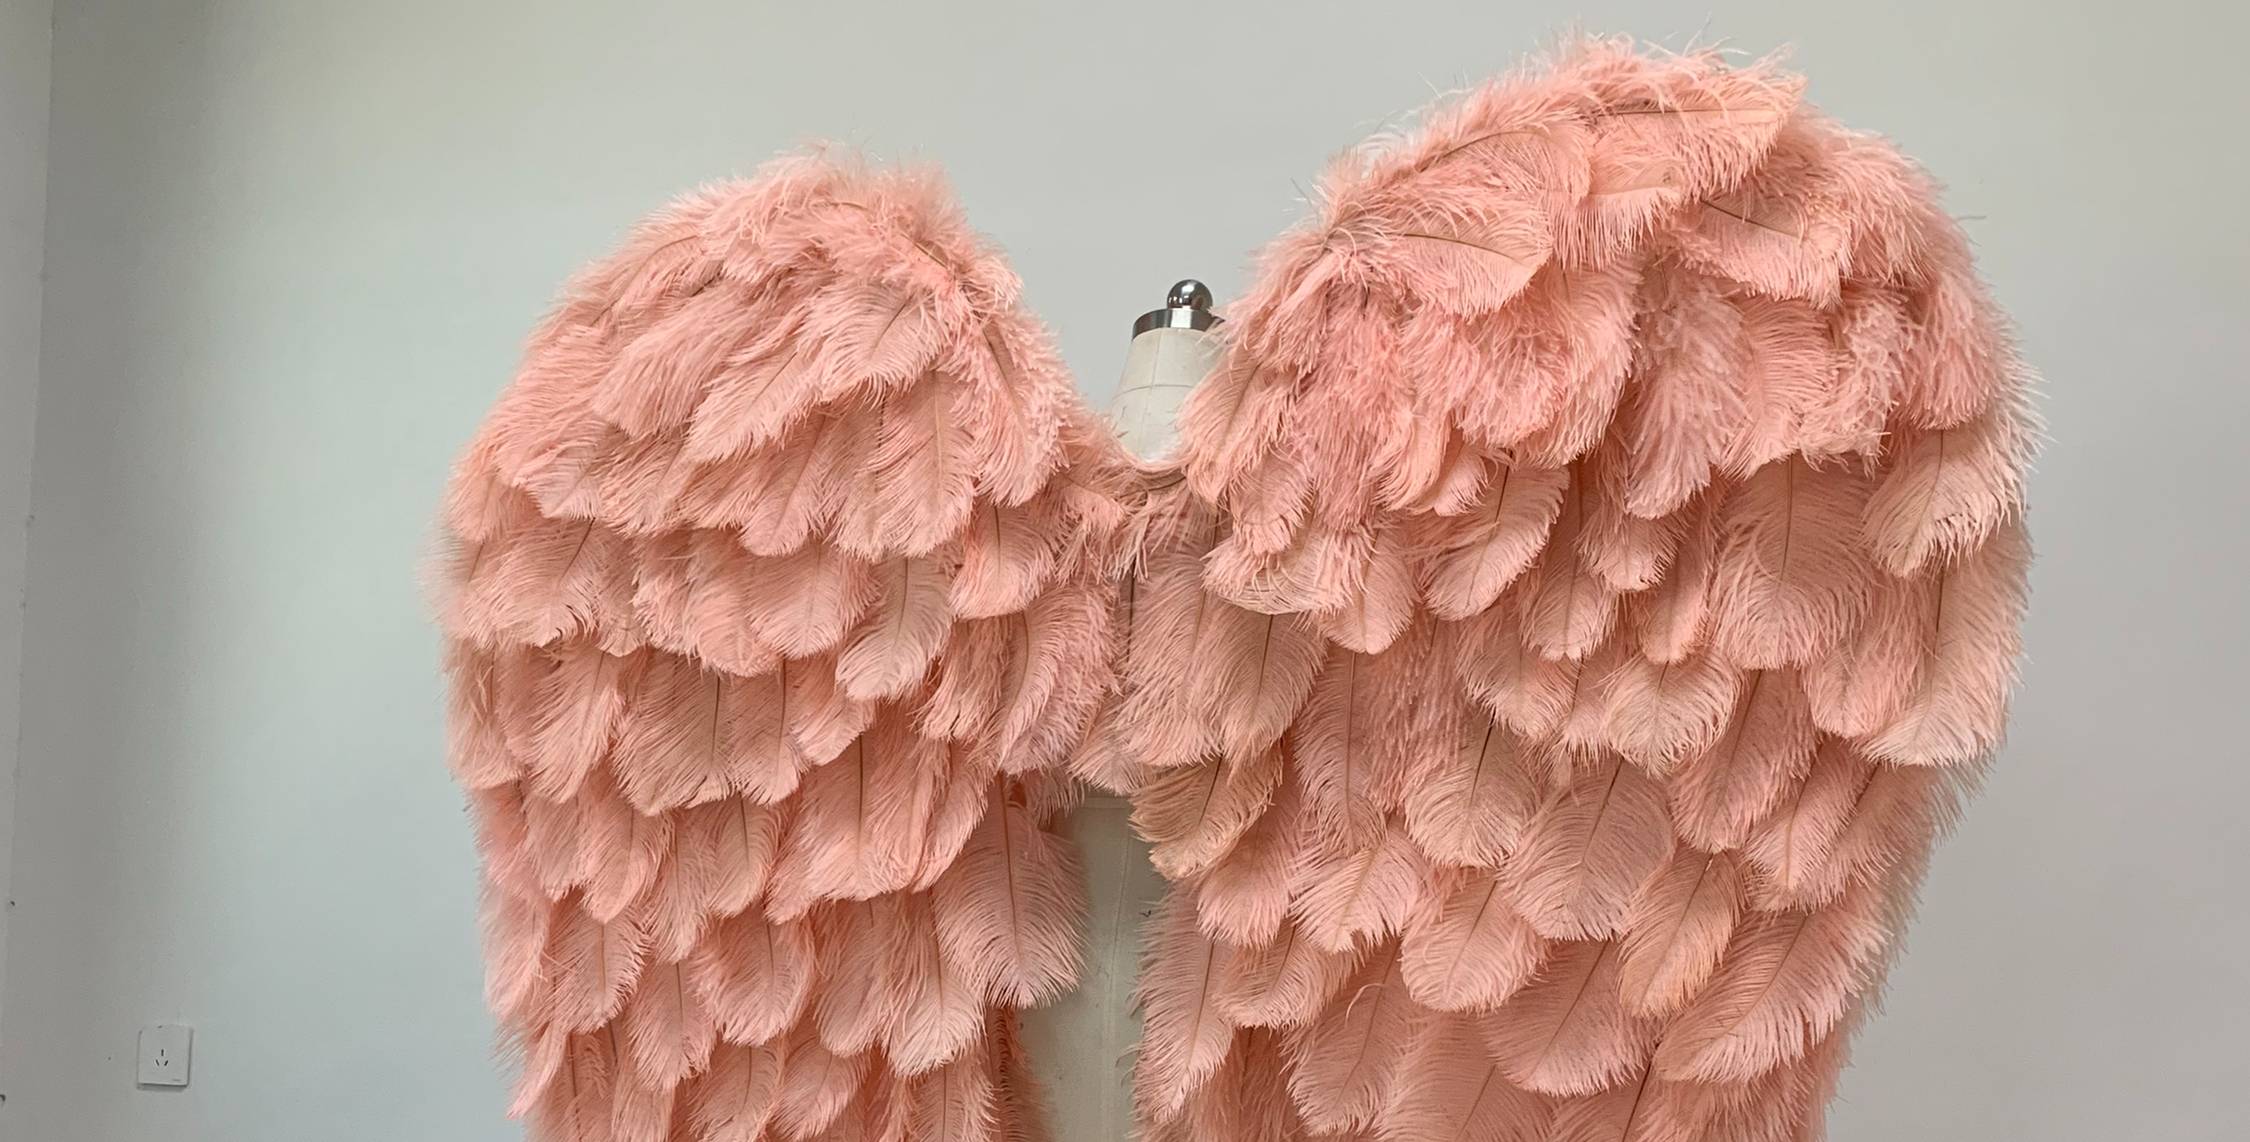 Our luxury ostrich wings. Made from ostrich feathers. Suitable for angel costume photoshoots especially for boudoirs.